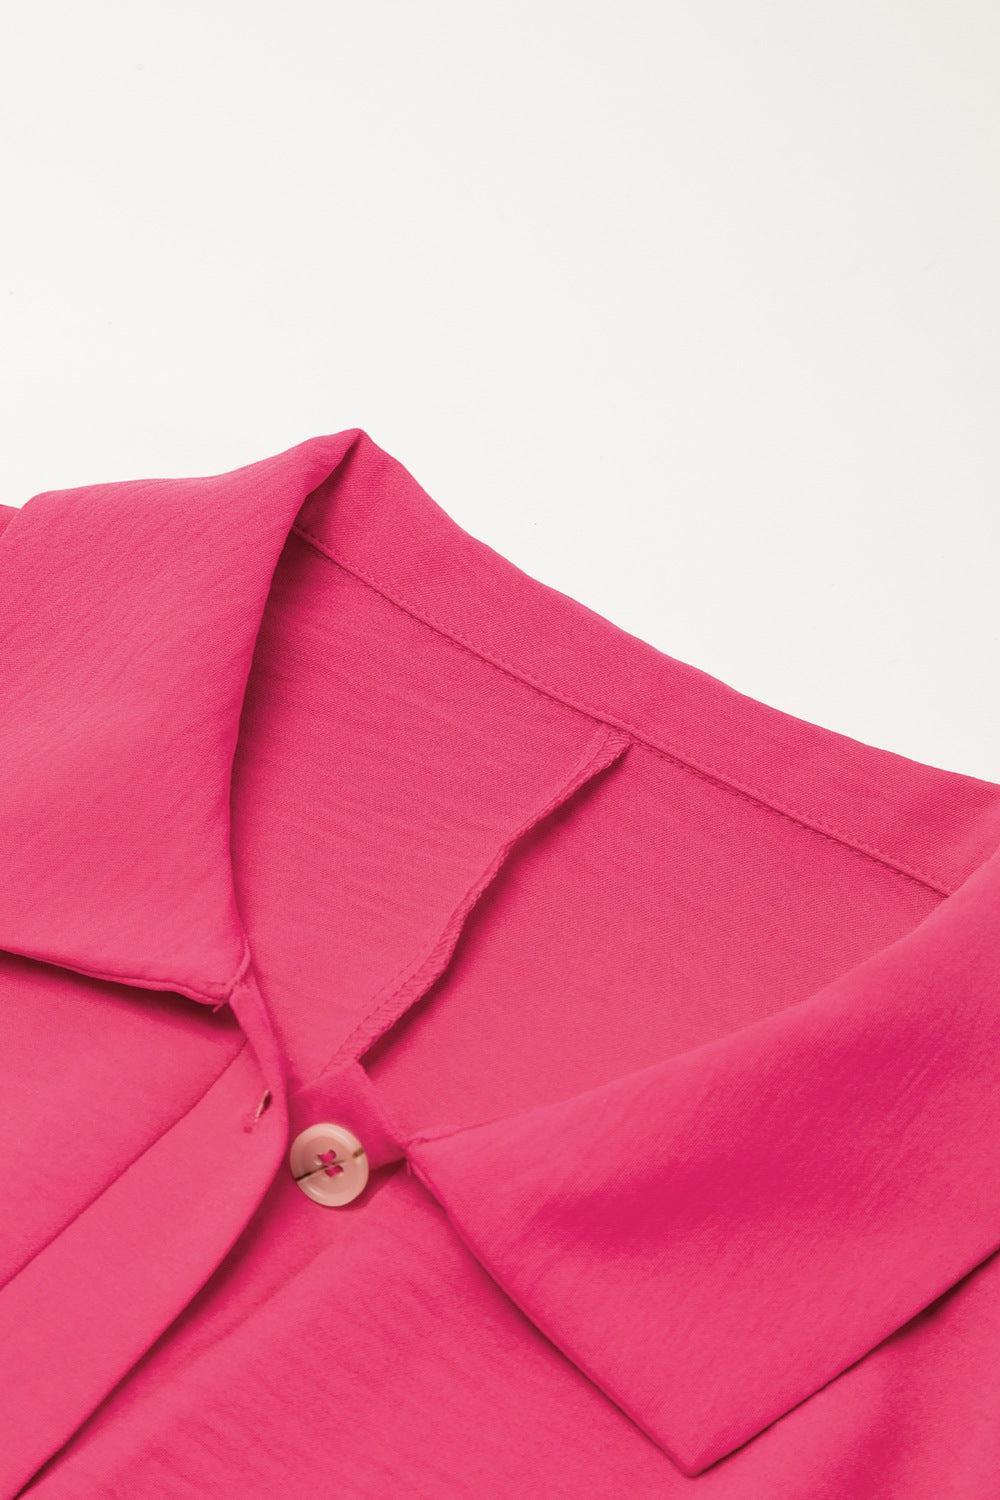 a close up of a pink shirt on a white background